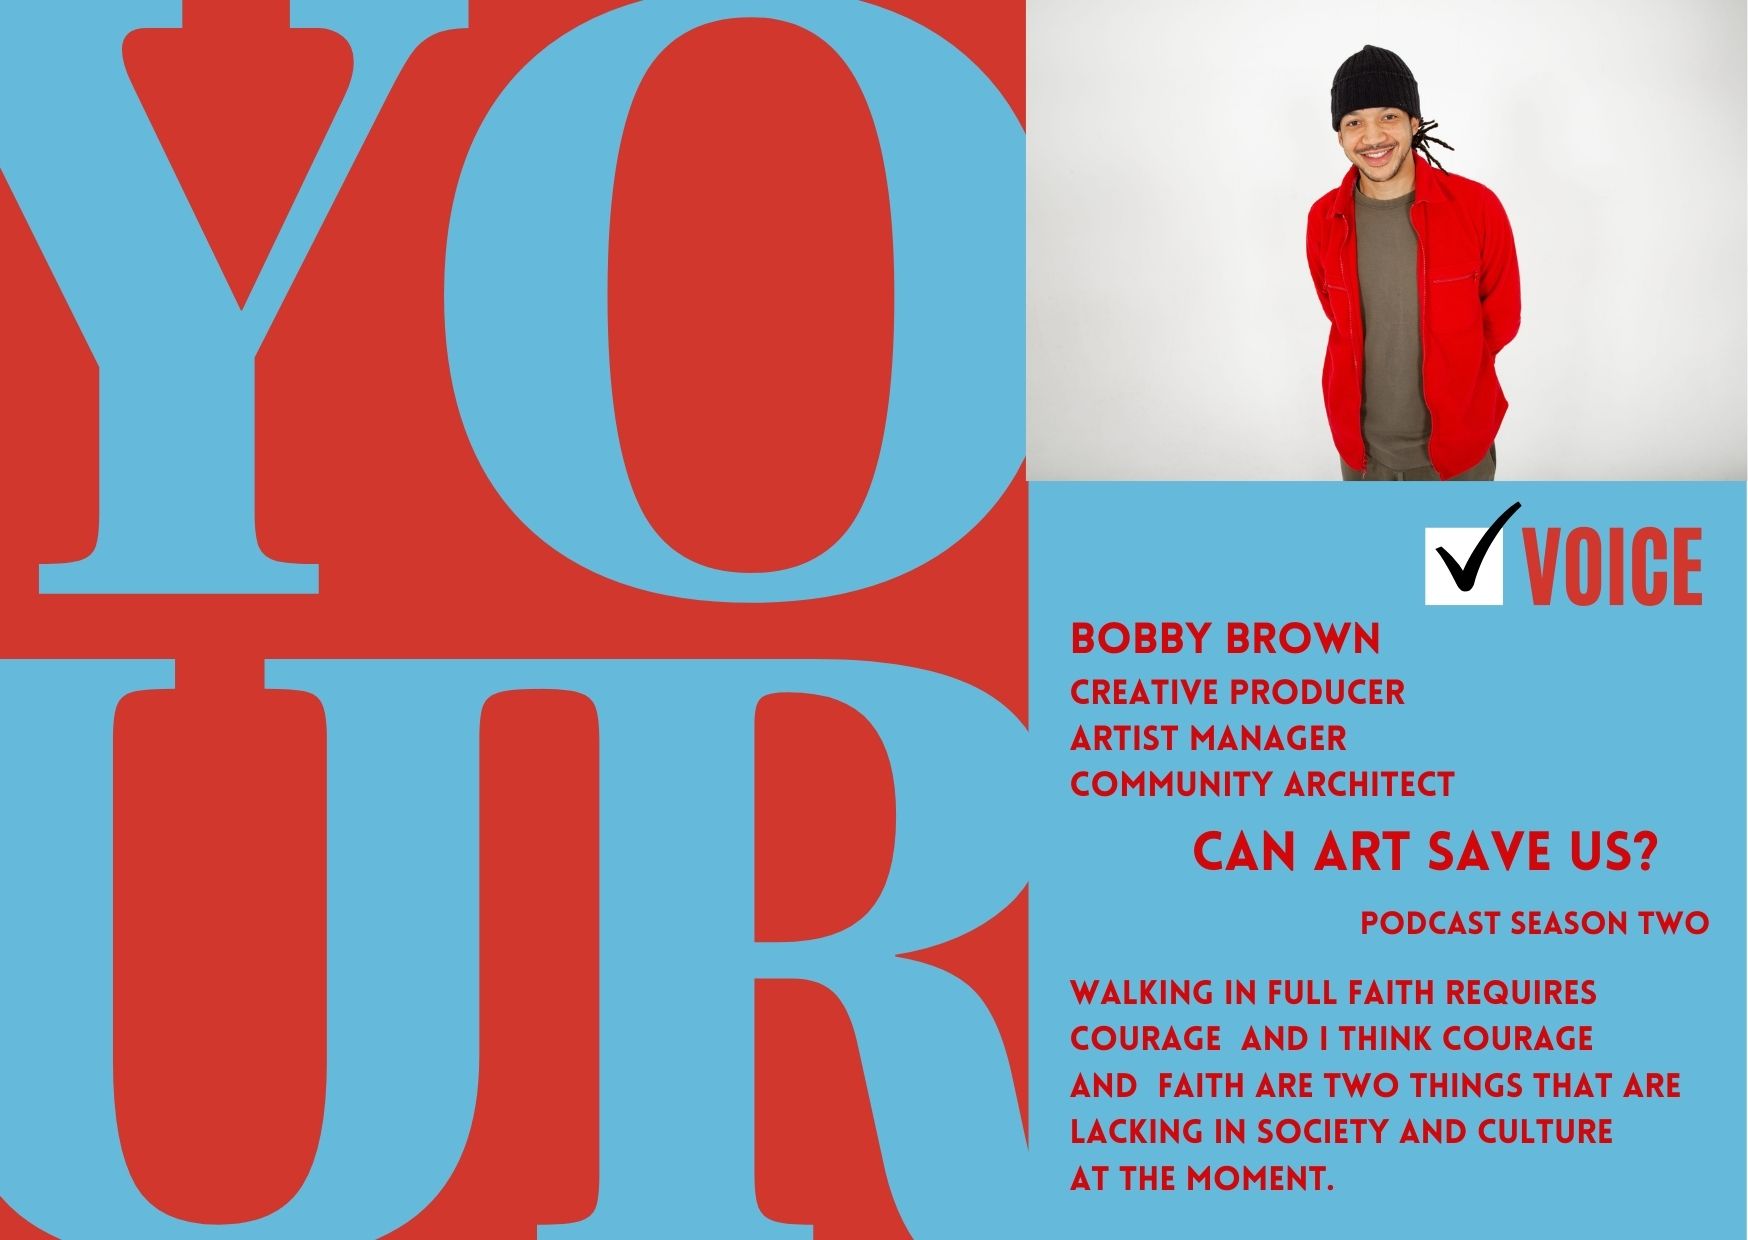 Portrait of Bobby Brown against red and blue graphics stating Your Voice.